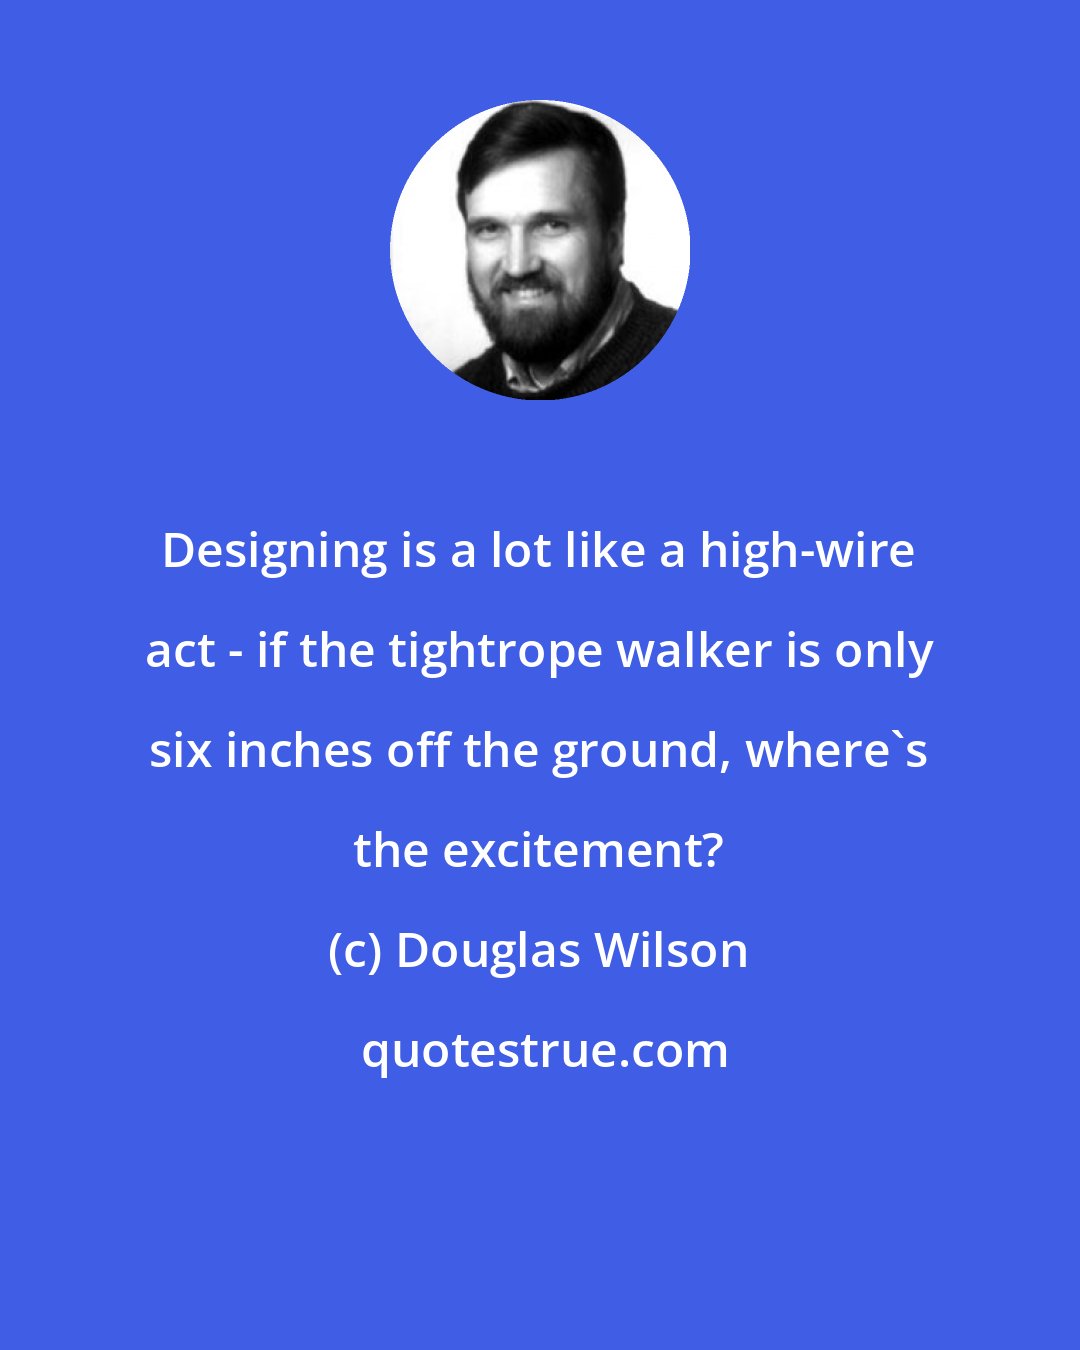 Douglas Wilson: Designing is a lot like a high-wire act - if the tightrope walker is only six inches off the ground, where's the excitement?